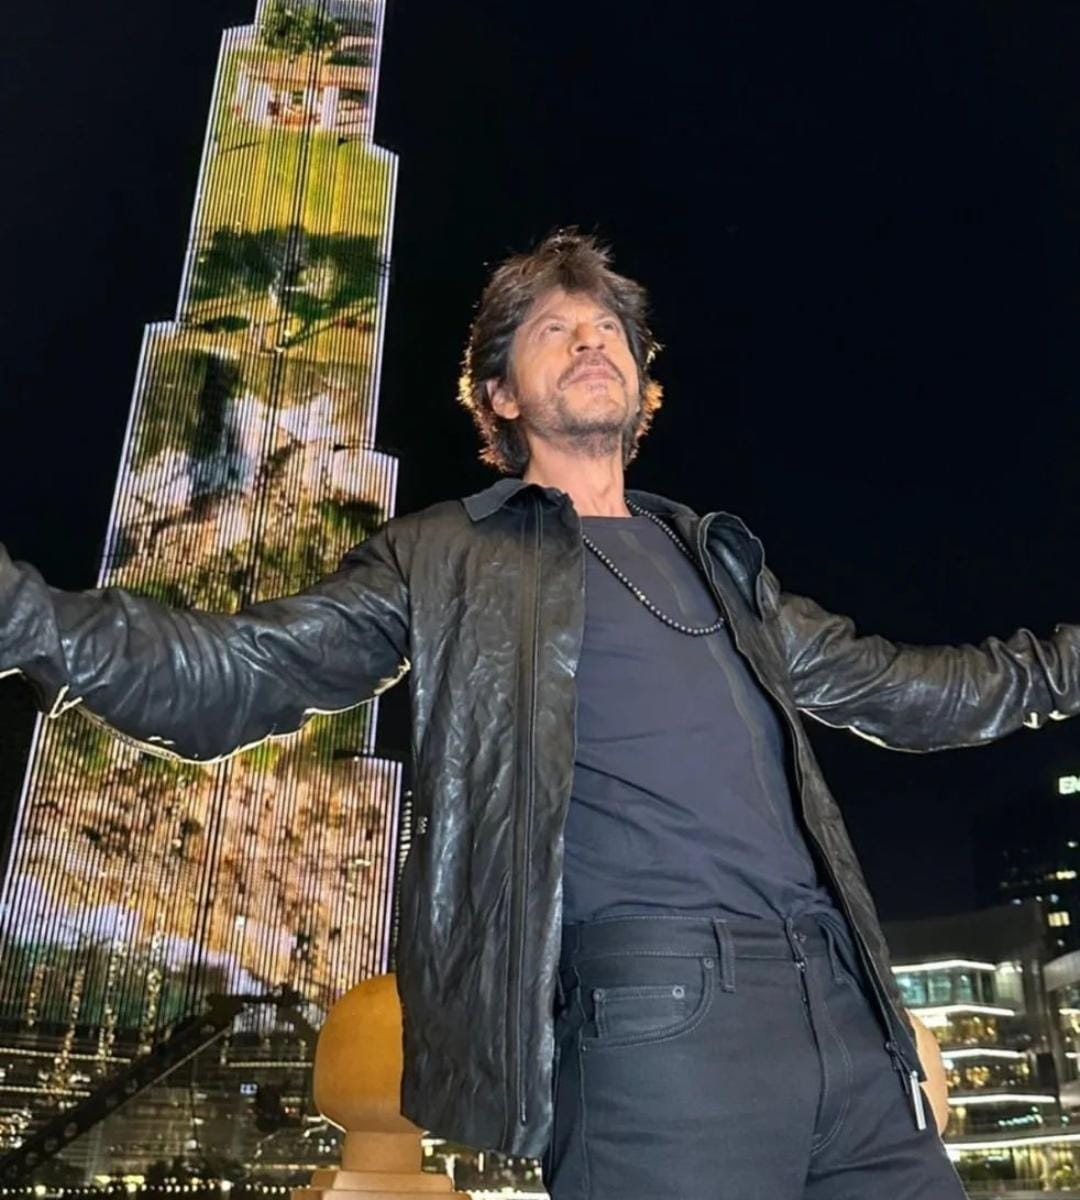 Dance, Giveaways & More; Shah Rukh Khan Spotted At Global Village, Dubai  For Dunki Promotions